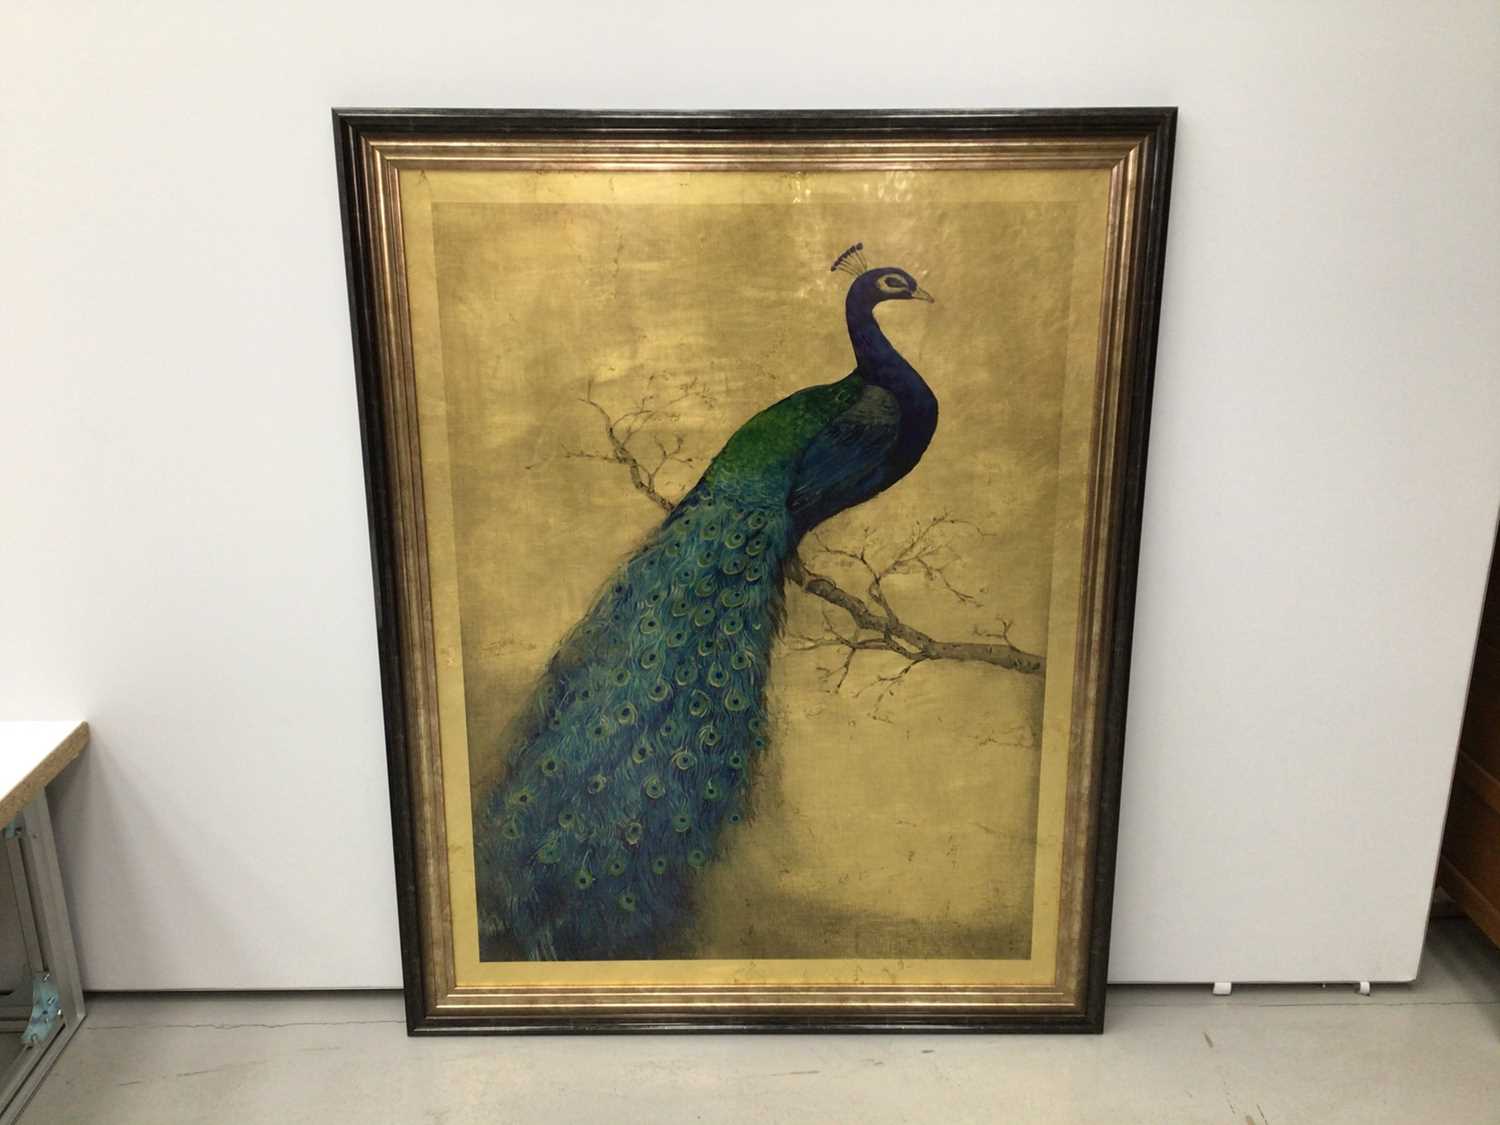 Lot 26 - Good decorative large picture of a peacock